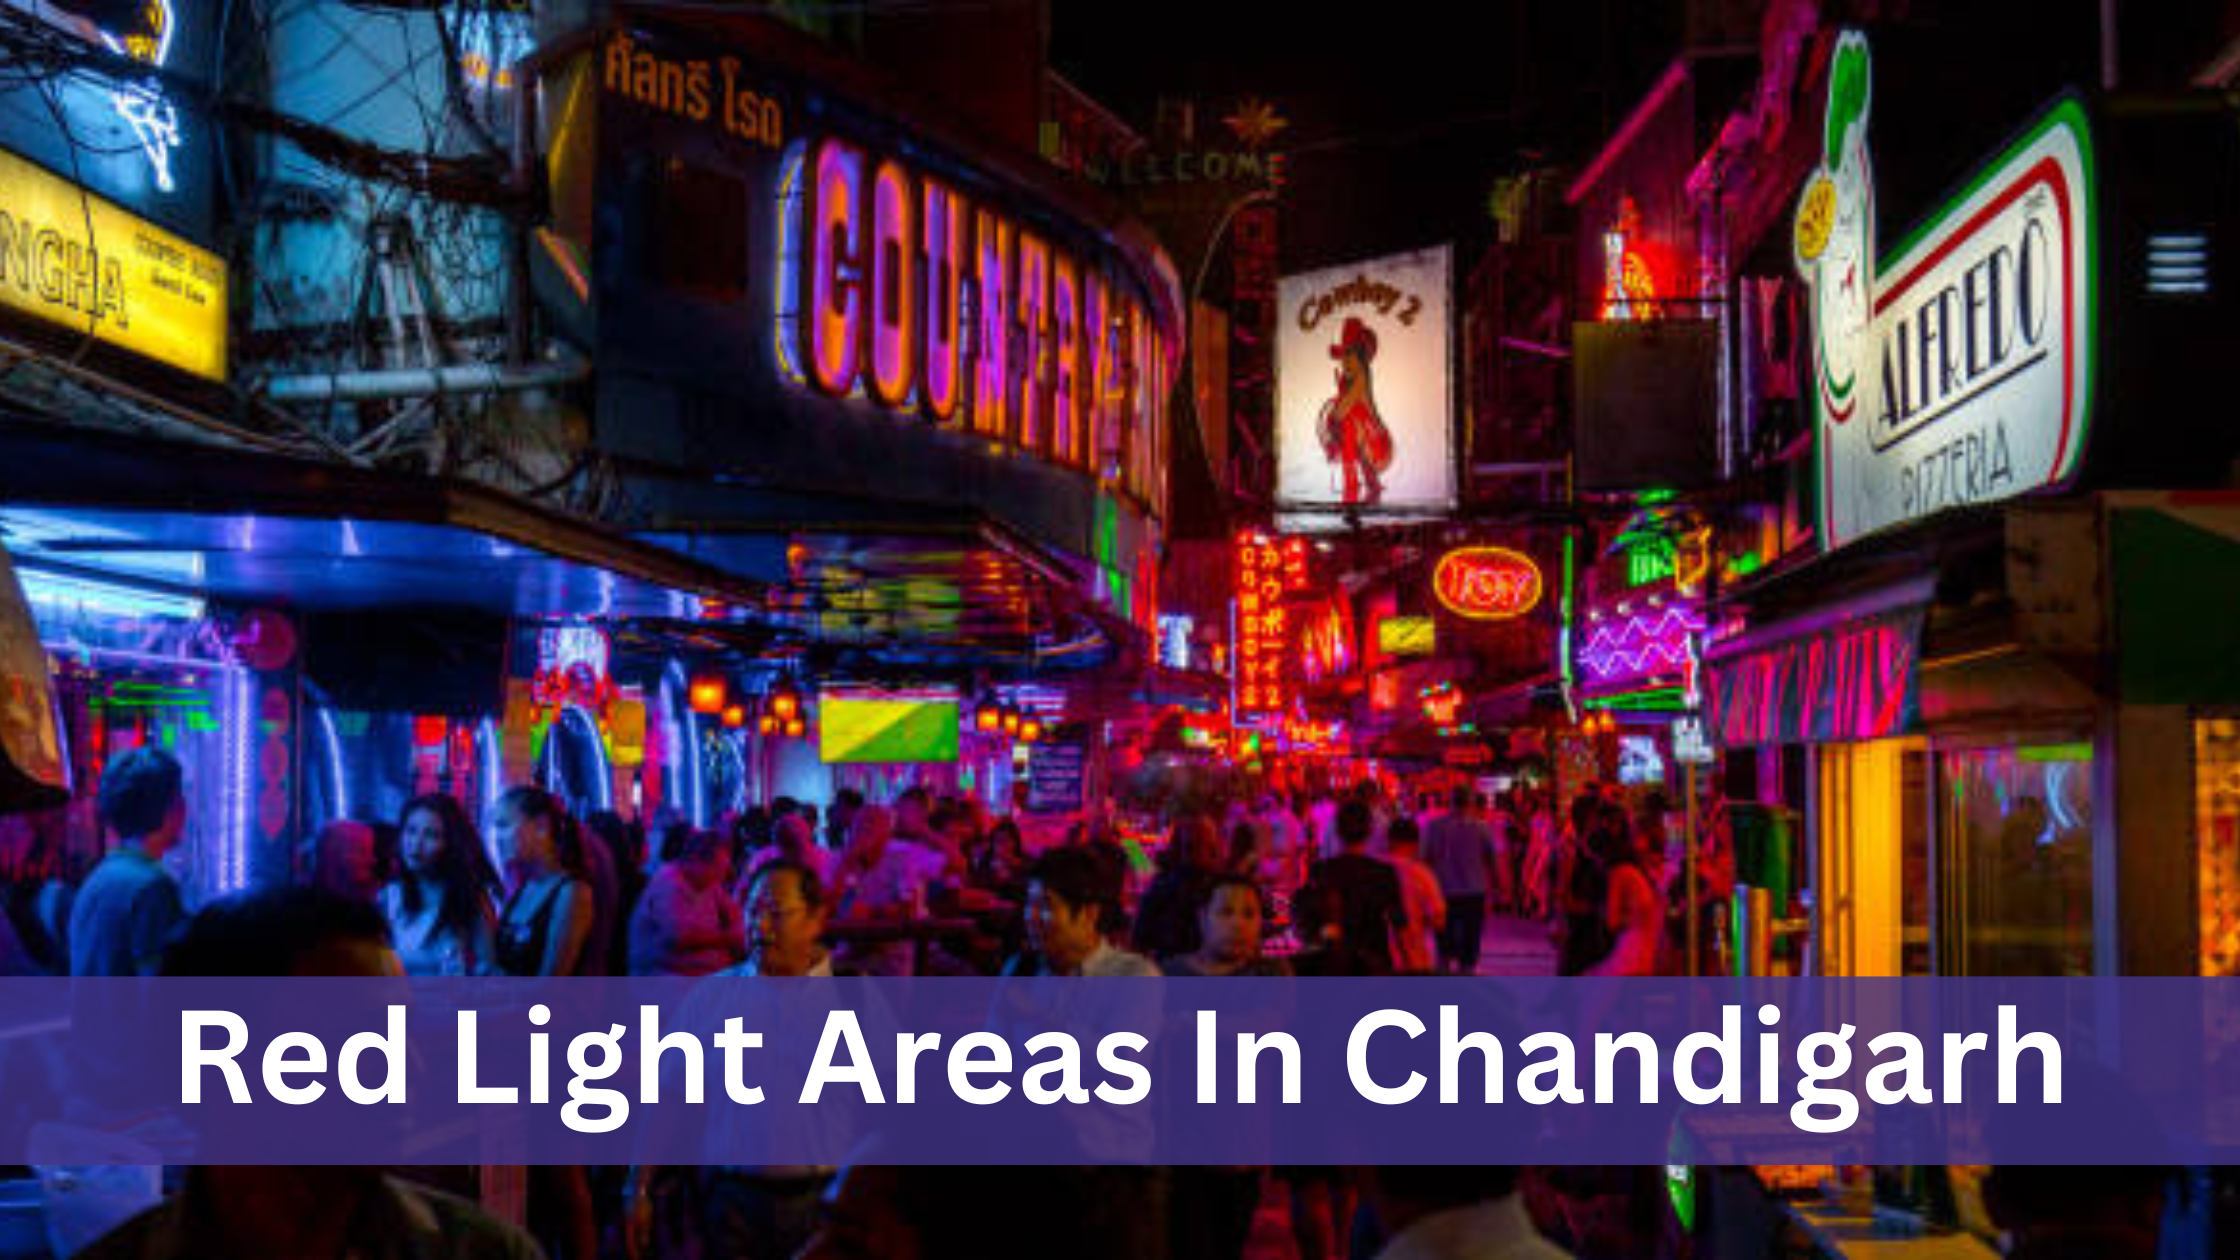 Red Light Areas In Chandigarh